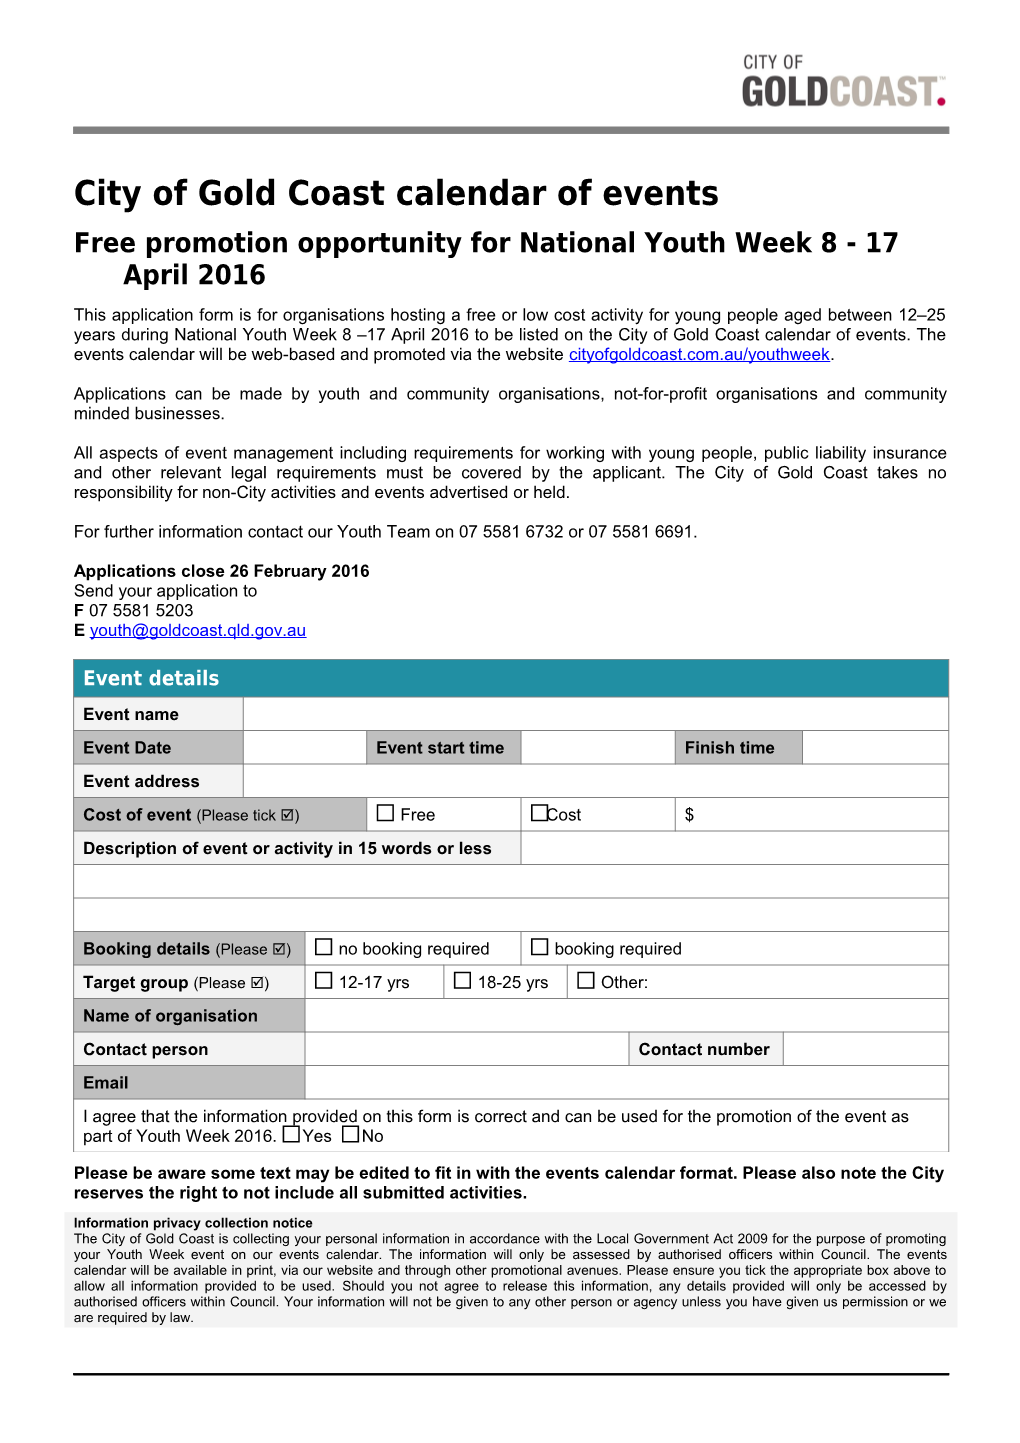 Free Promotion Opportunity for National Youth Week 8 - 17 April 2016 Application Form